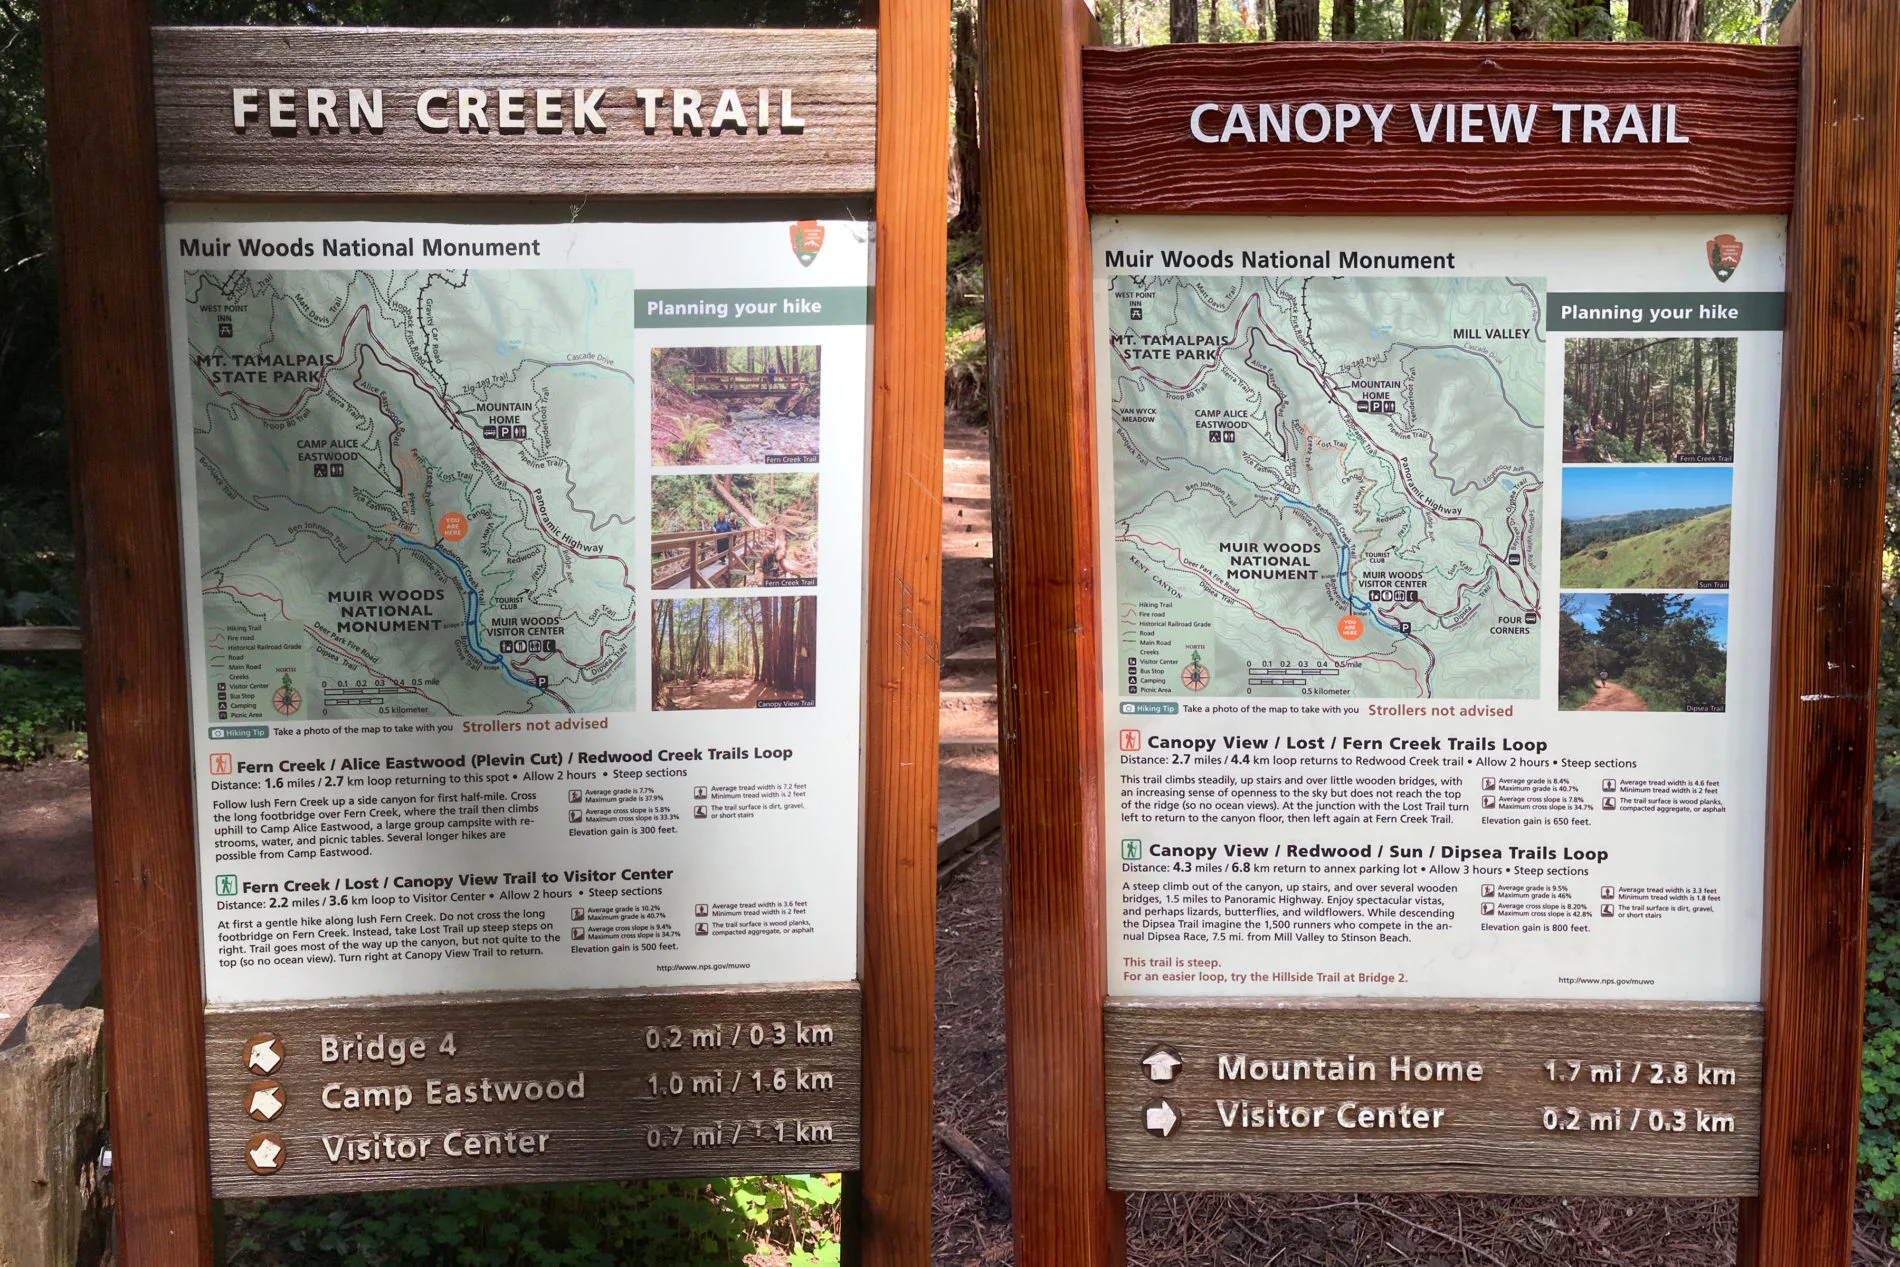 Muir Woods trails signs with maps and descriptions for the Fern Creek and Canopy View trails.